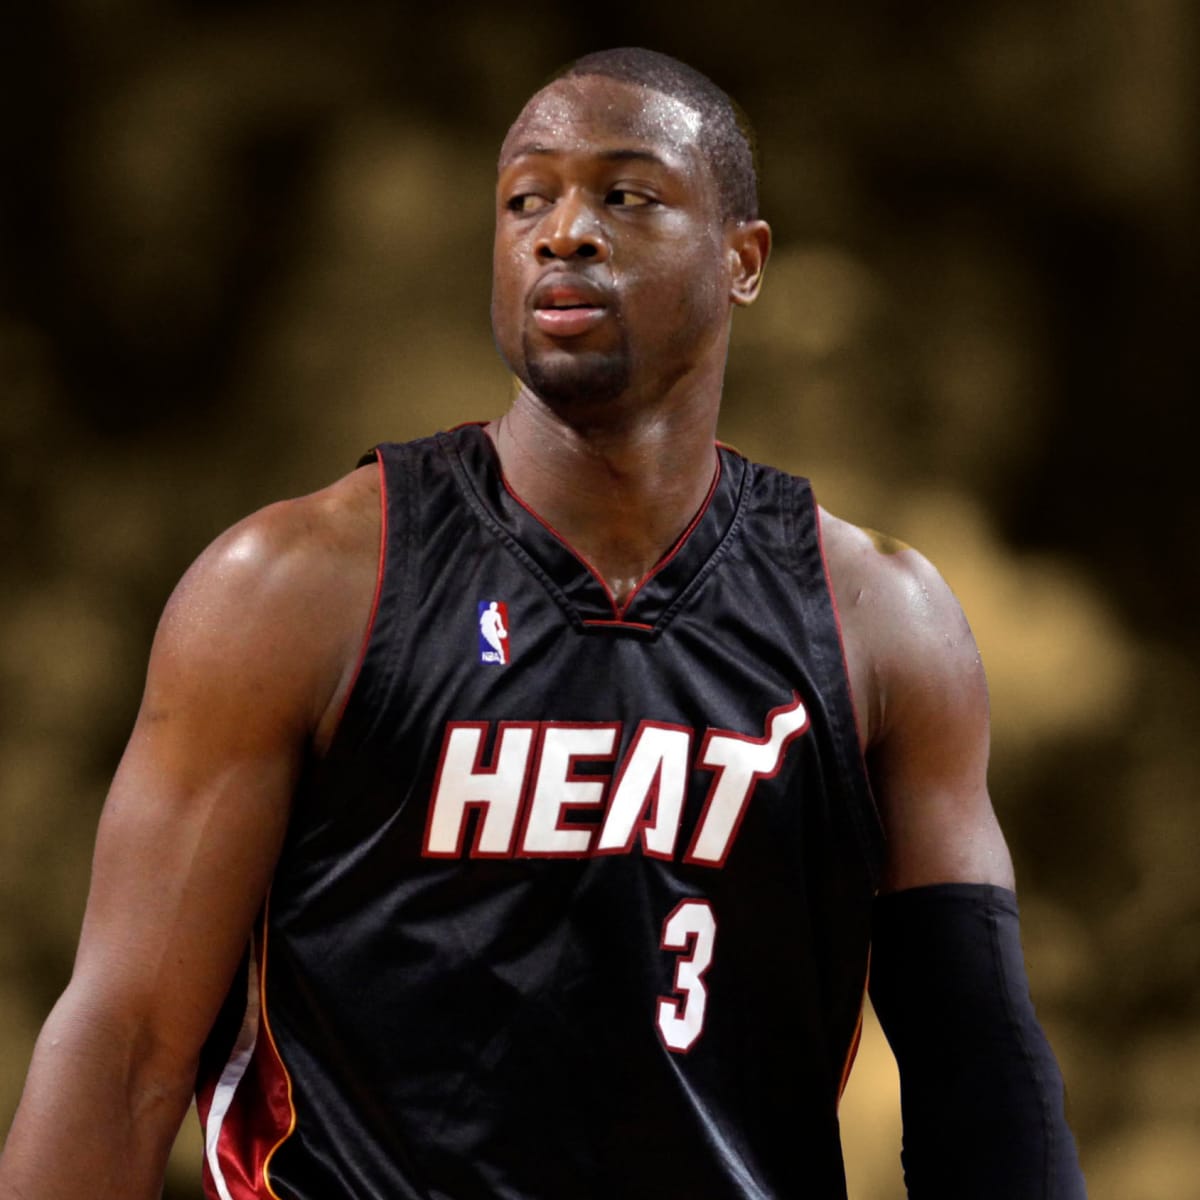 Misha Konygin on X: In 2006 NBA Finals, Dwyane Wade had 43 points with  clutch shots in Game 5 ⚡️ @DwyaneWade  / X